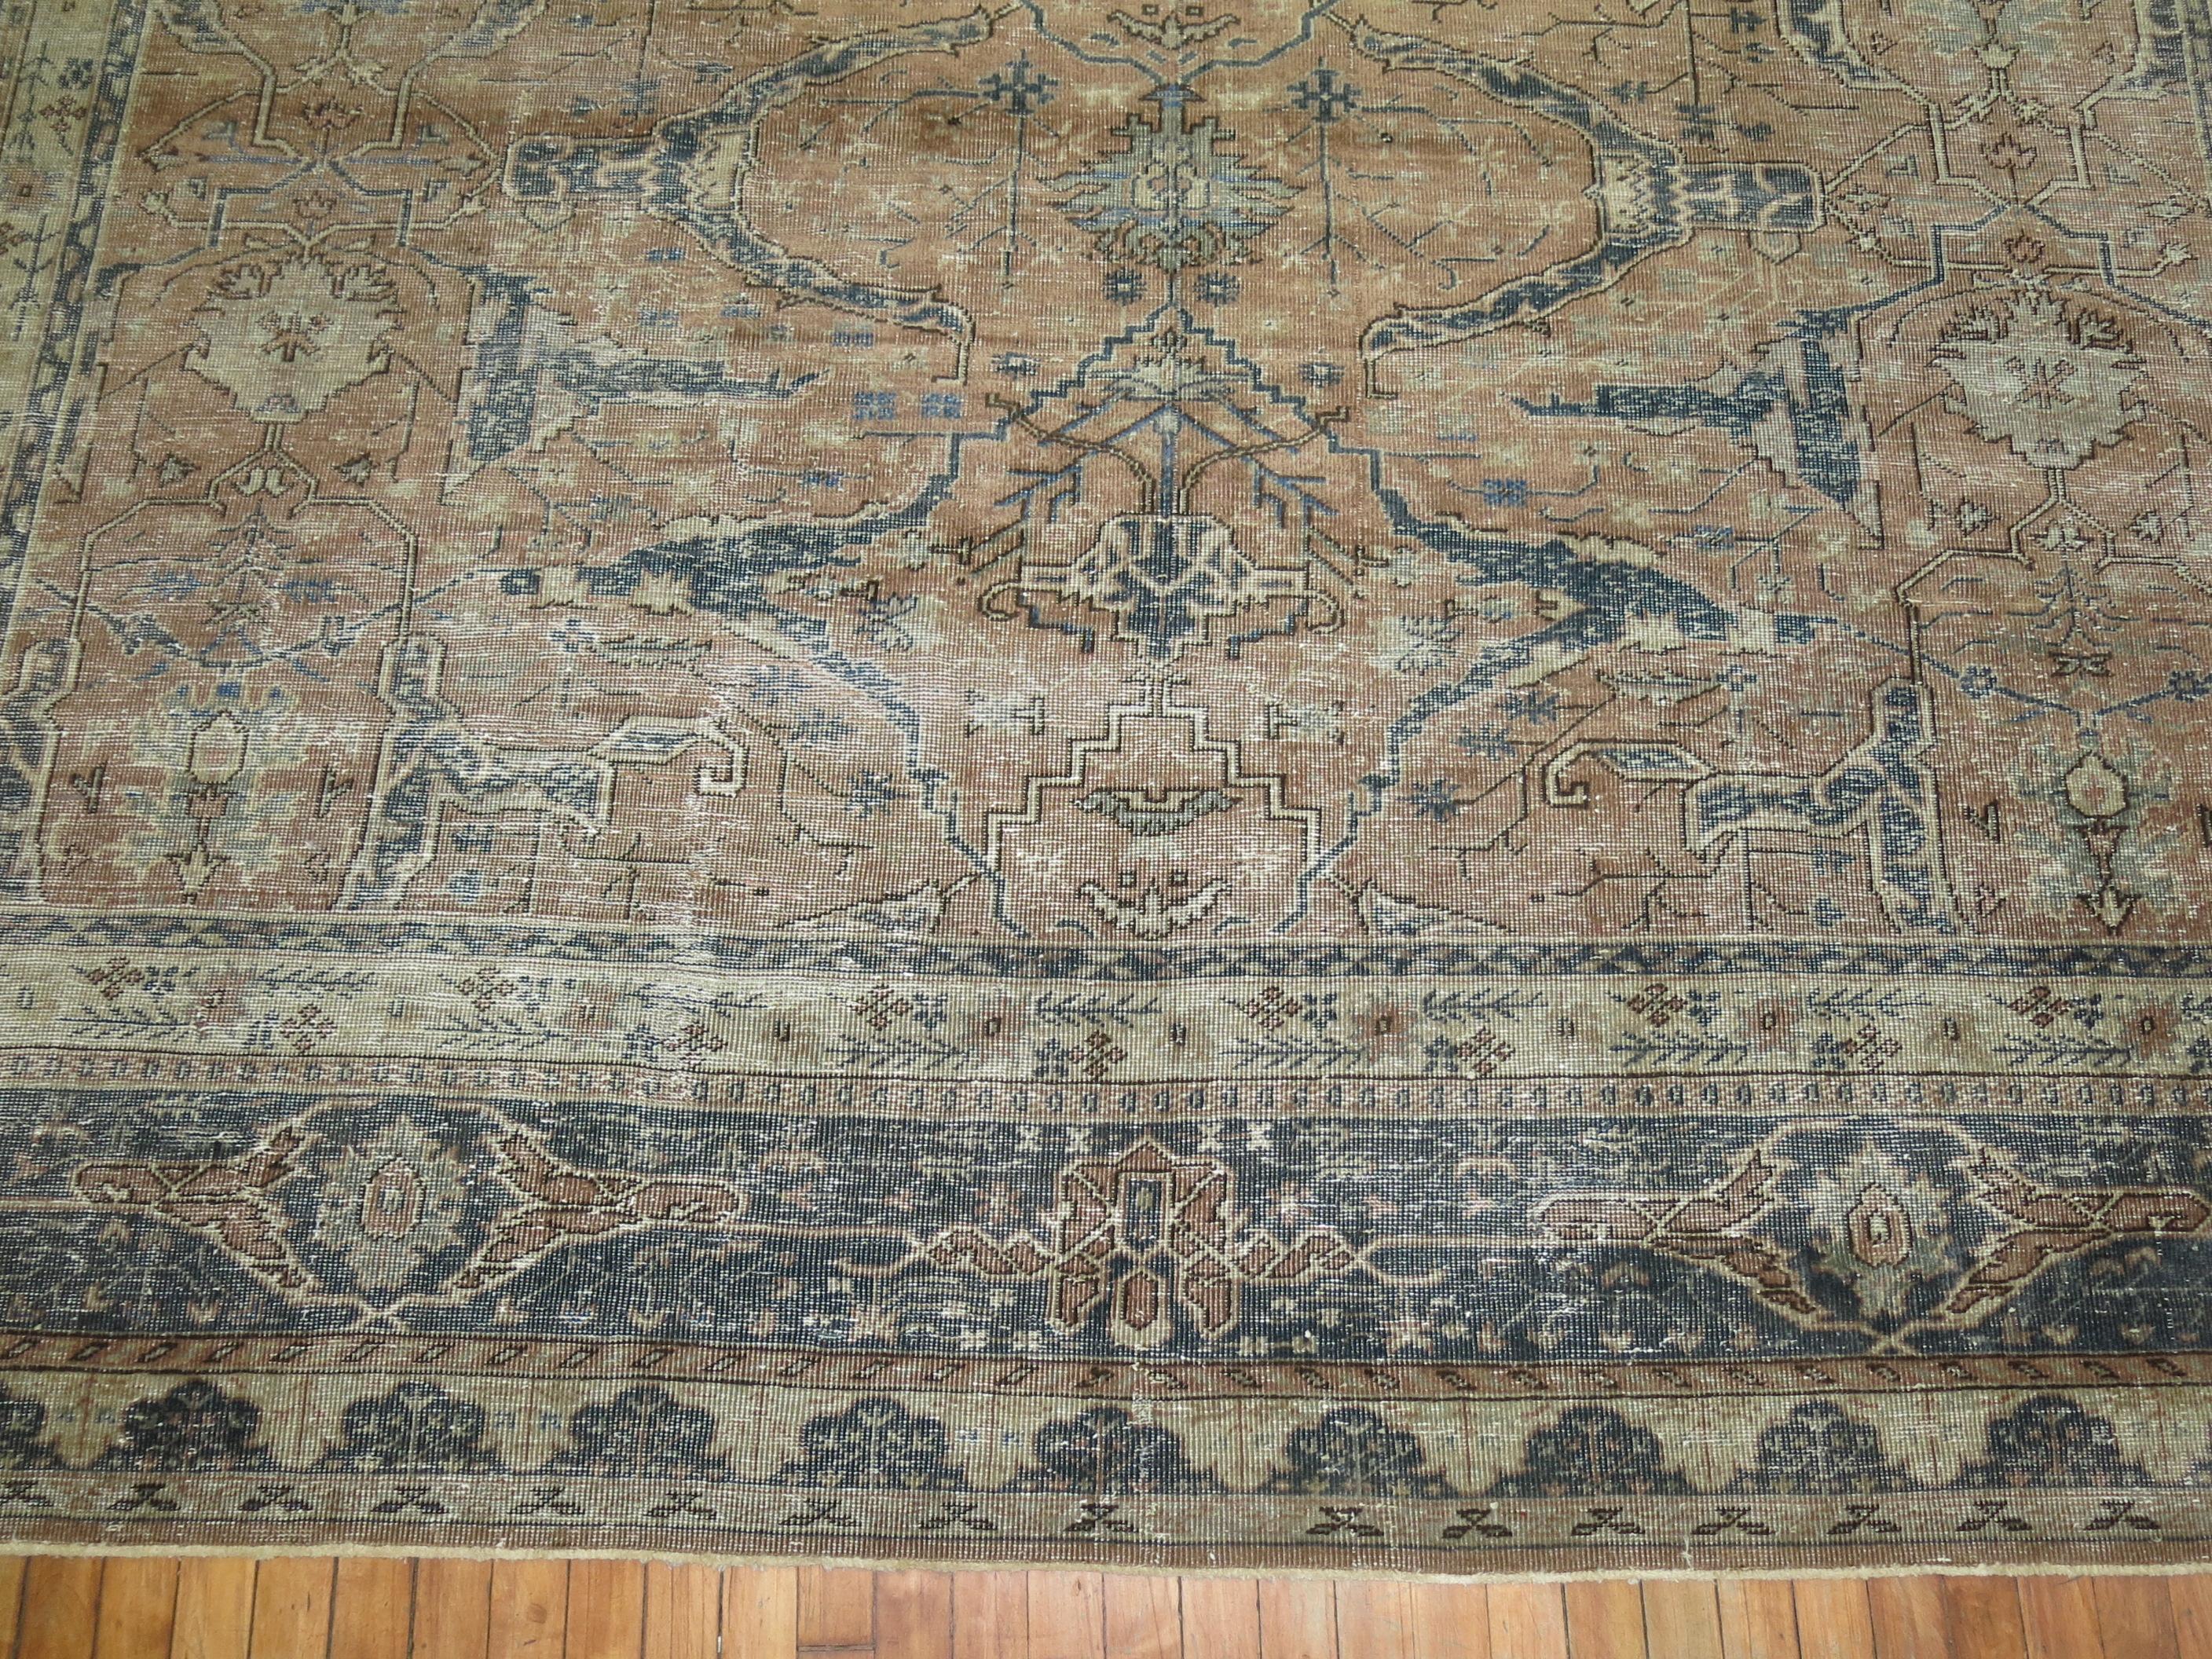 An evenly worn mid-20th century Turkish rug featuring an-all-over garrus design derived from 19th century Persian Bidjar rugs.